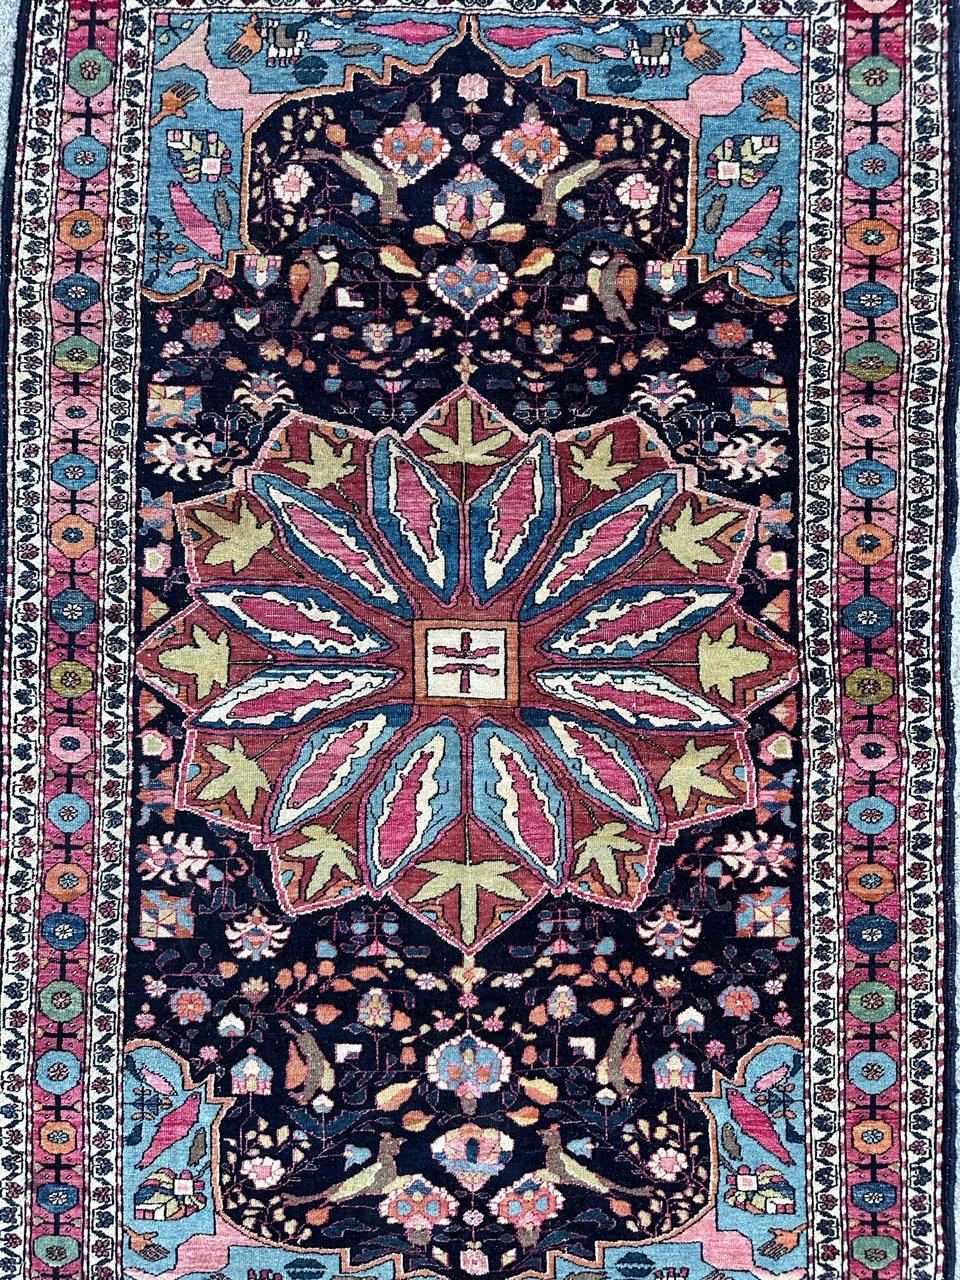 Discover a stunning early 20th-century rug that exudes elegance! This exquisite piece features a captivating floral and central medallion design, all meticulously hand-knotted with wool velvet on a cotton foundation. The deep blue background sets